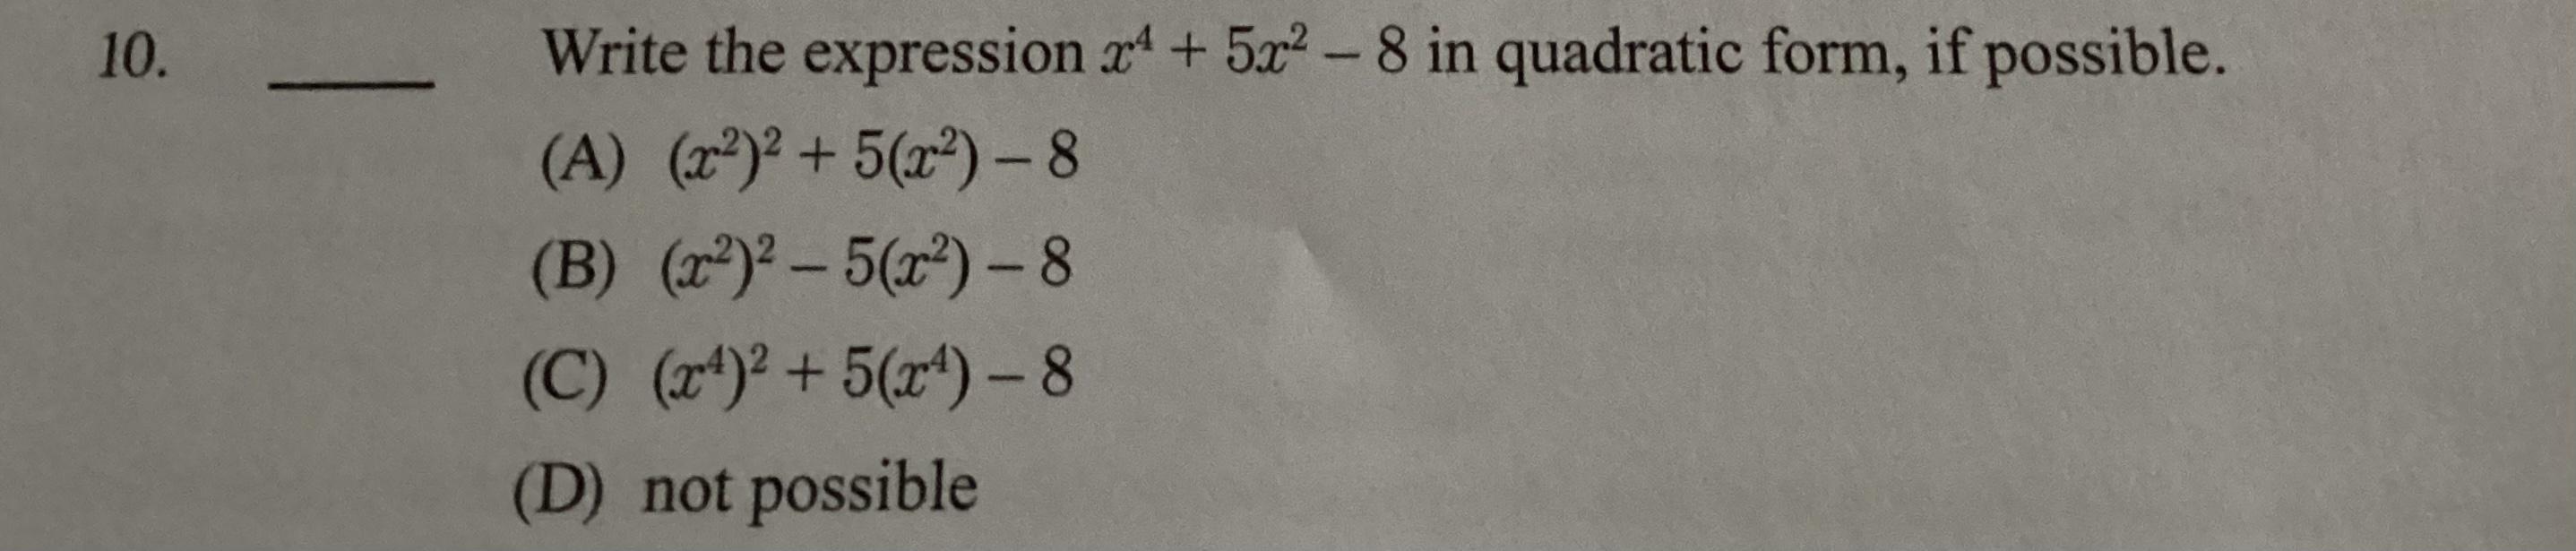 50 Points! Write The Expression X^4+5x^2-8 In Quadratic Form, If Possible. Photo Attached. Thank You!